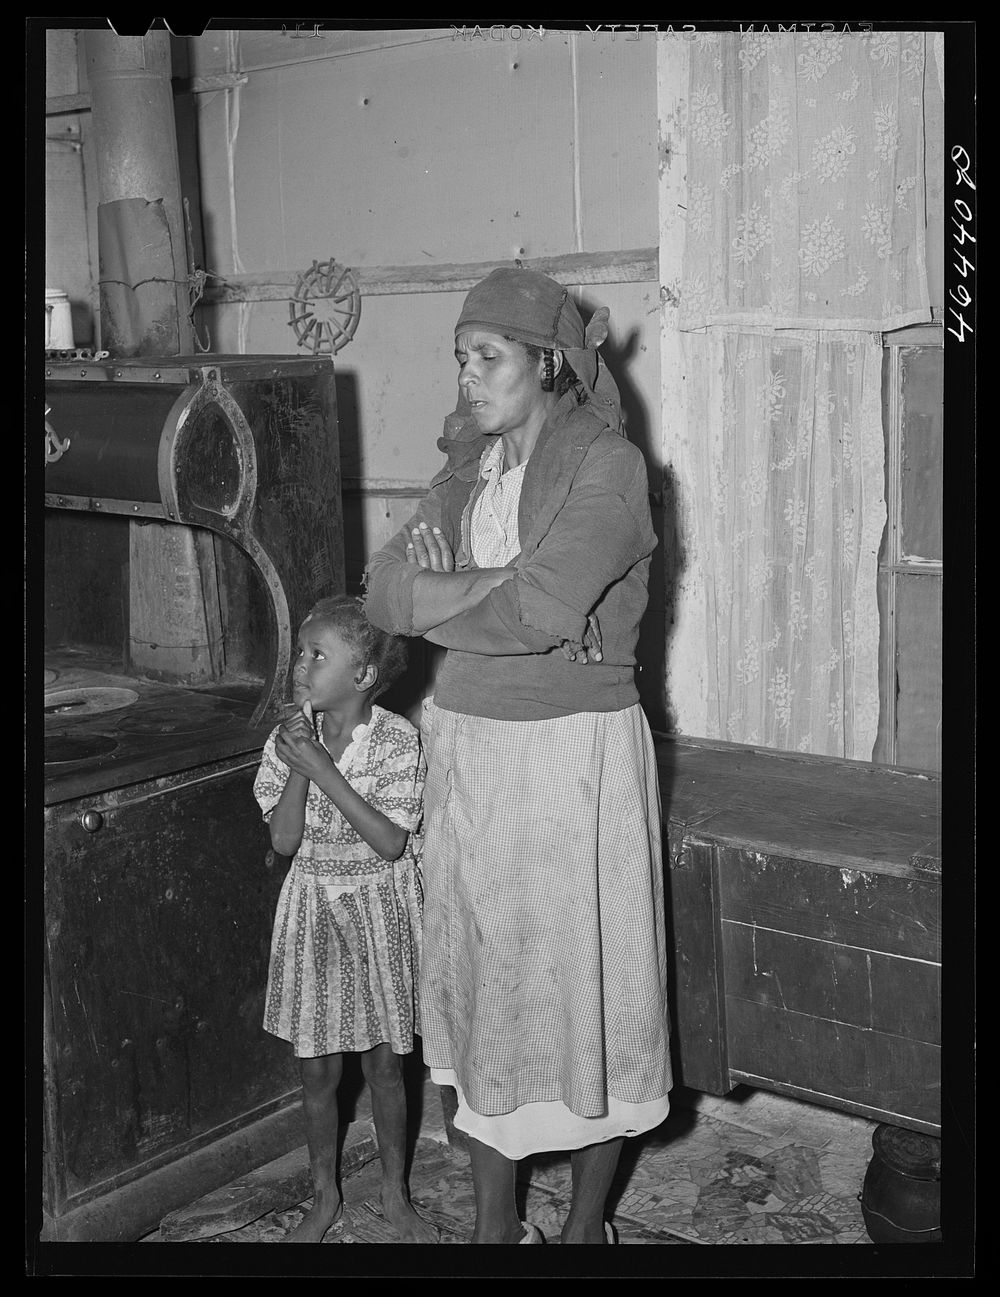 [Untitled photo, possibly related to: Mrs. Buck Grant FSA (Farm Security Administration) client, with her canned goods. Near…